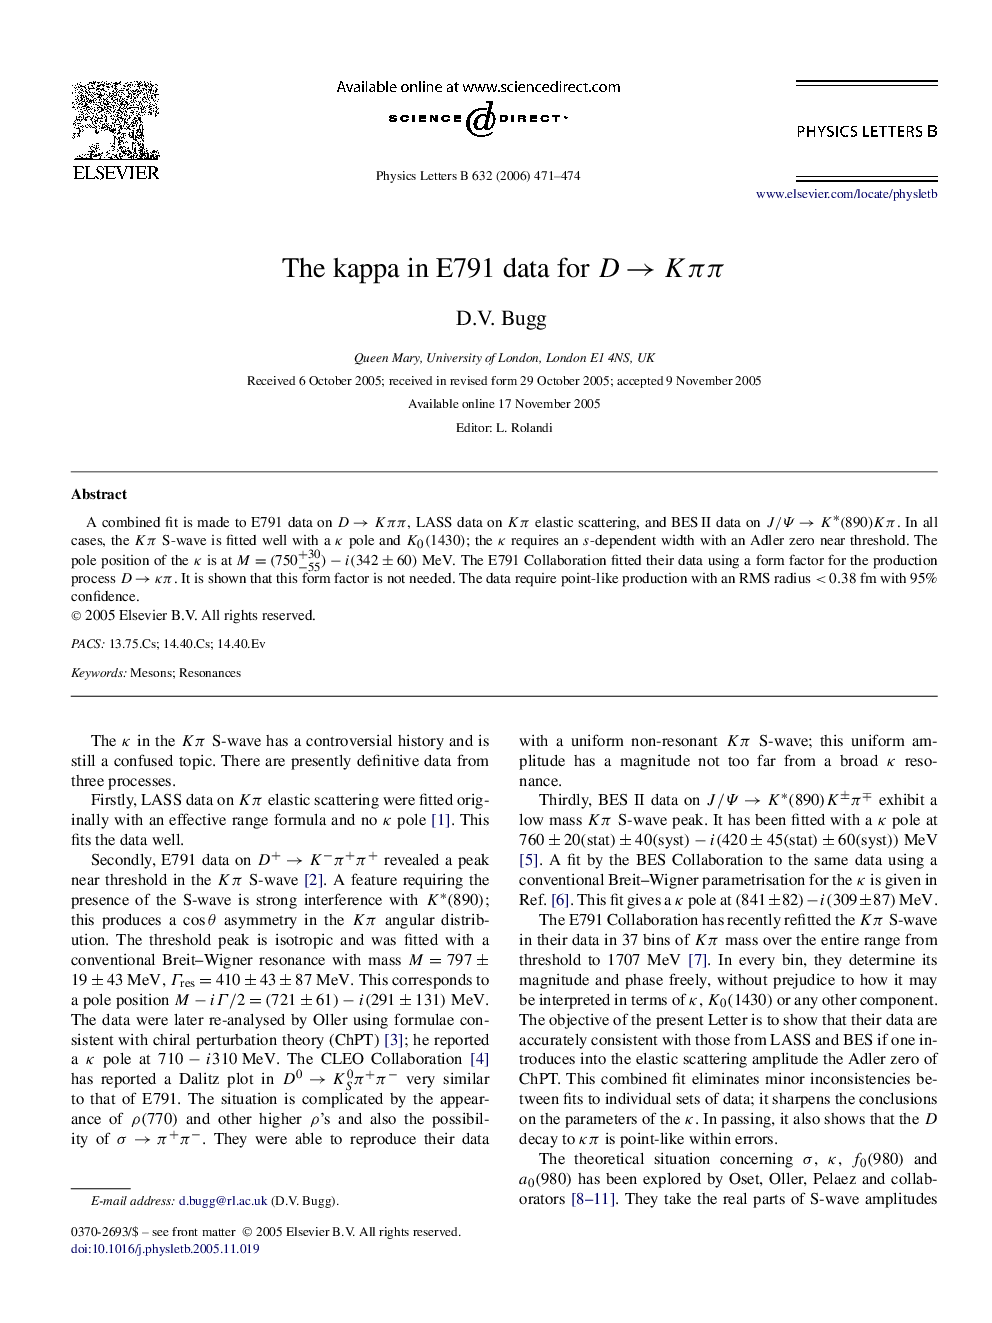 The kappa in E791 data for DâKÏÏ